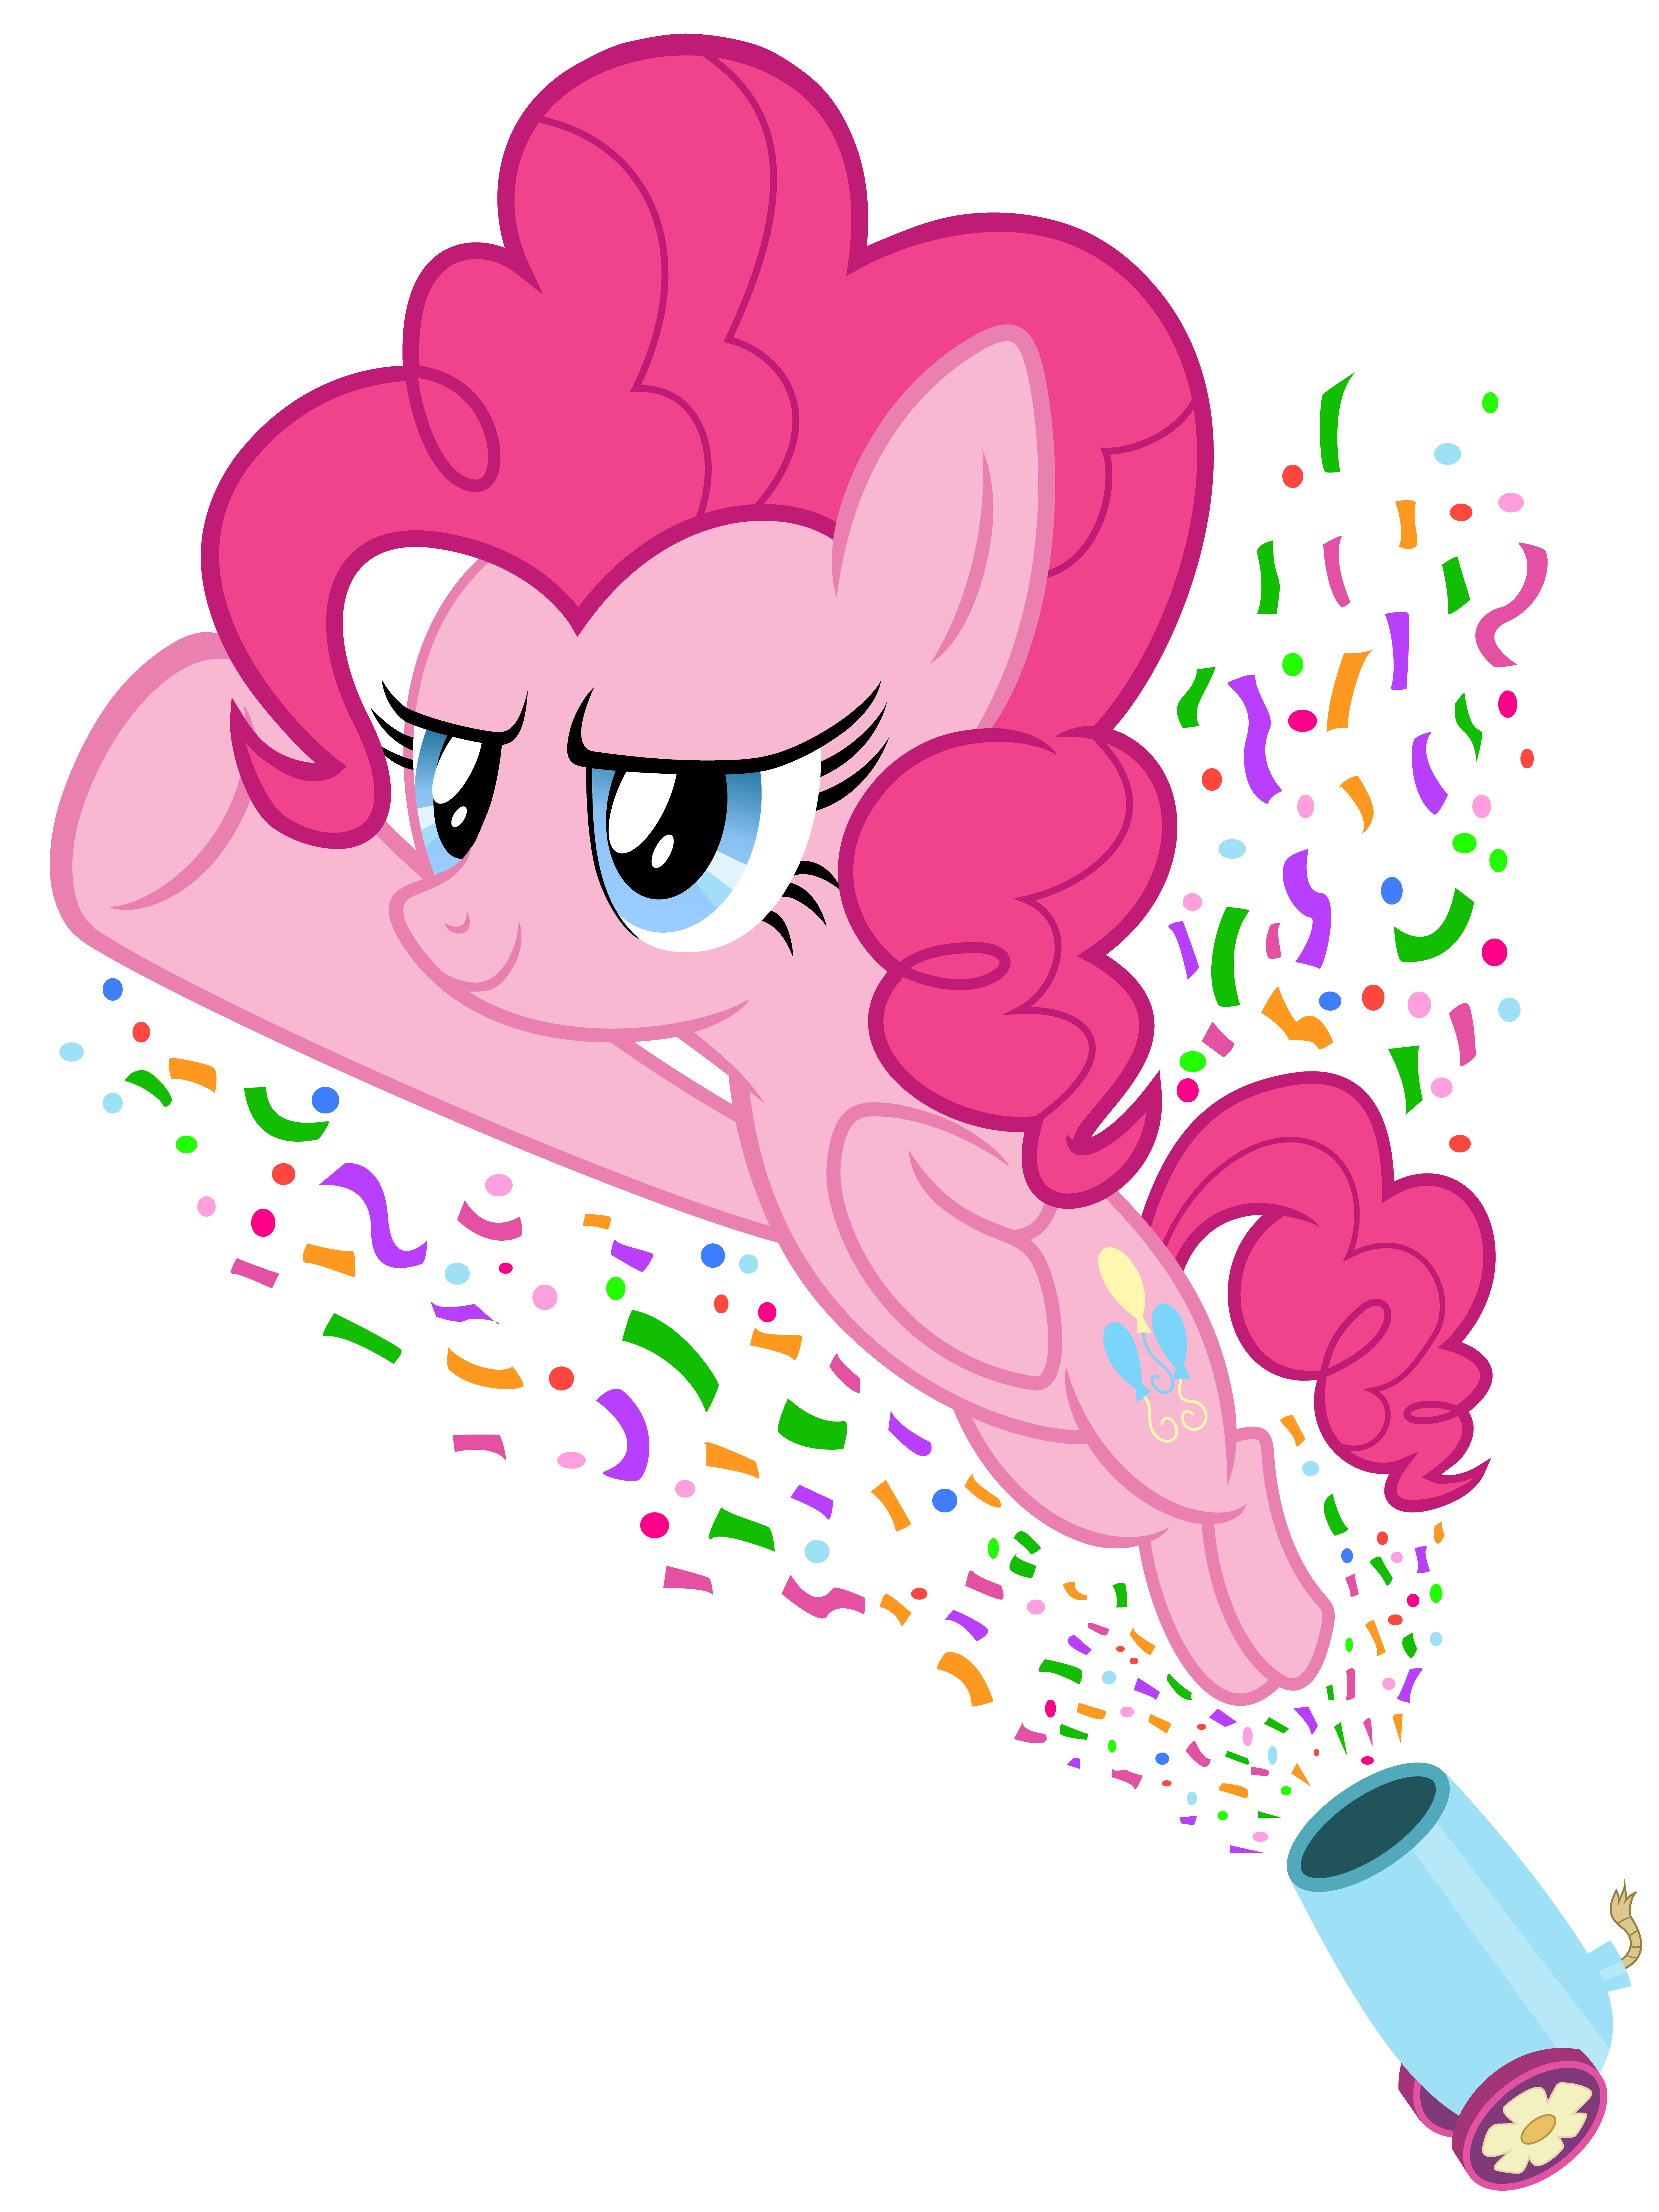 pinkie_pie___party_cannon_by_tygerbug-d4